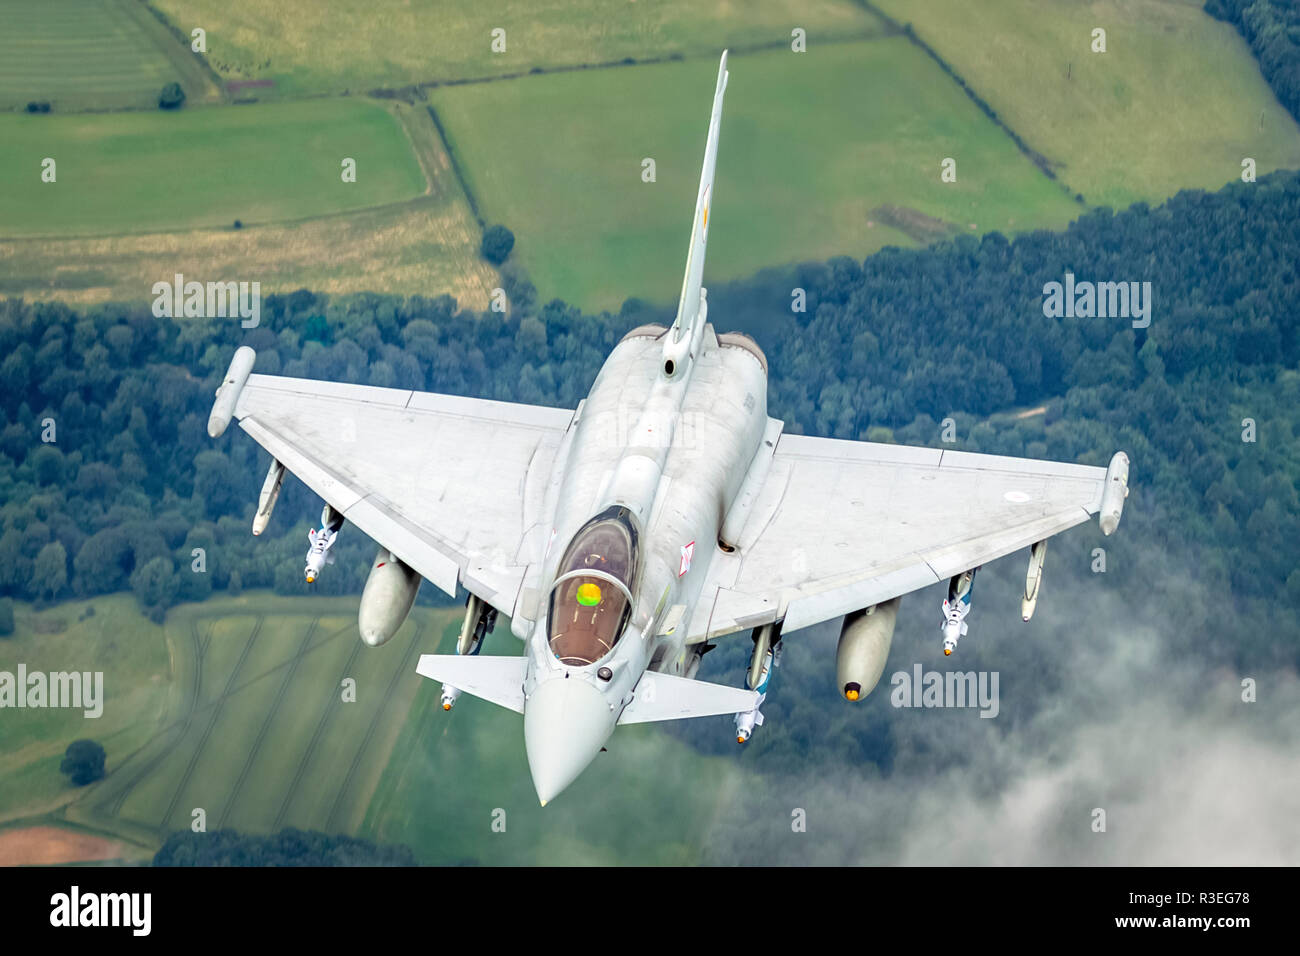 Royal Air force (RAF) Eurofighter Typhoon in flight. A twin-engine, canard-delta wing, multirole fighter. Photographed at Royal International Air Tatt Stock Photo